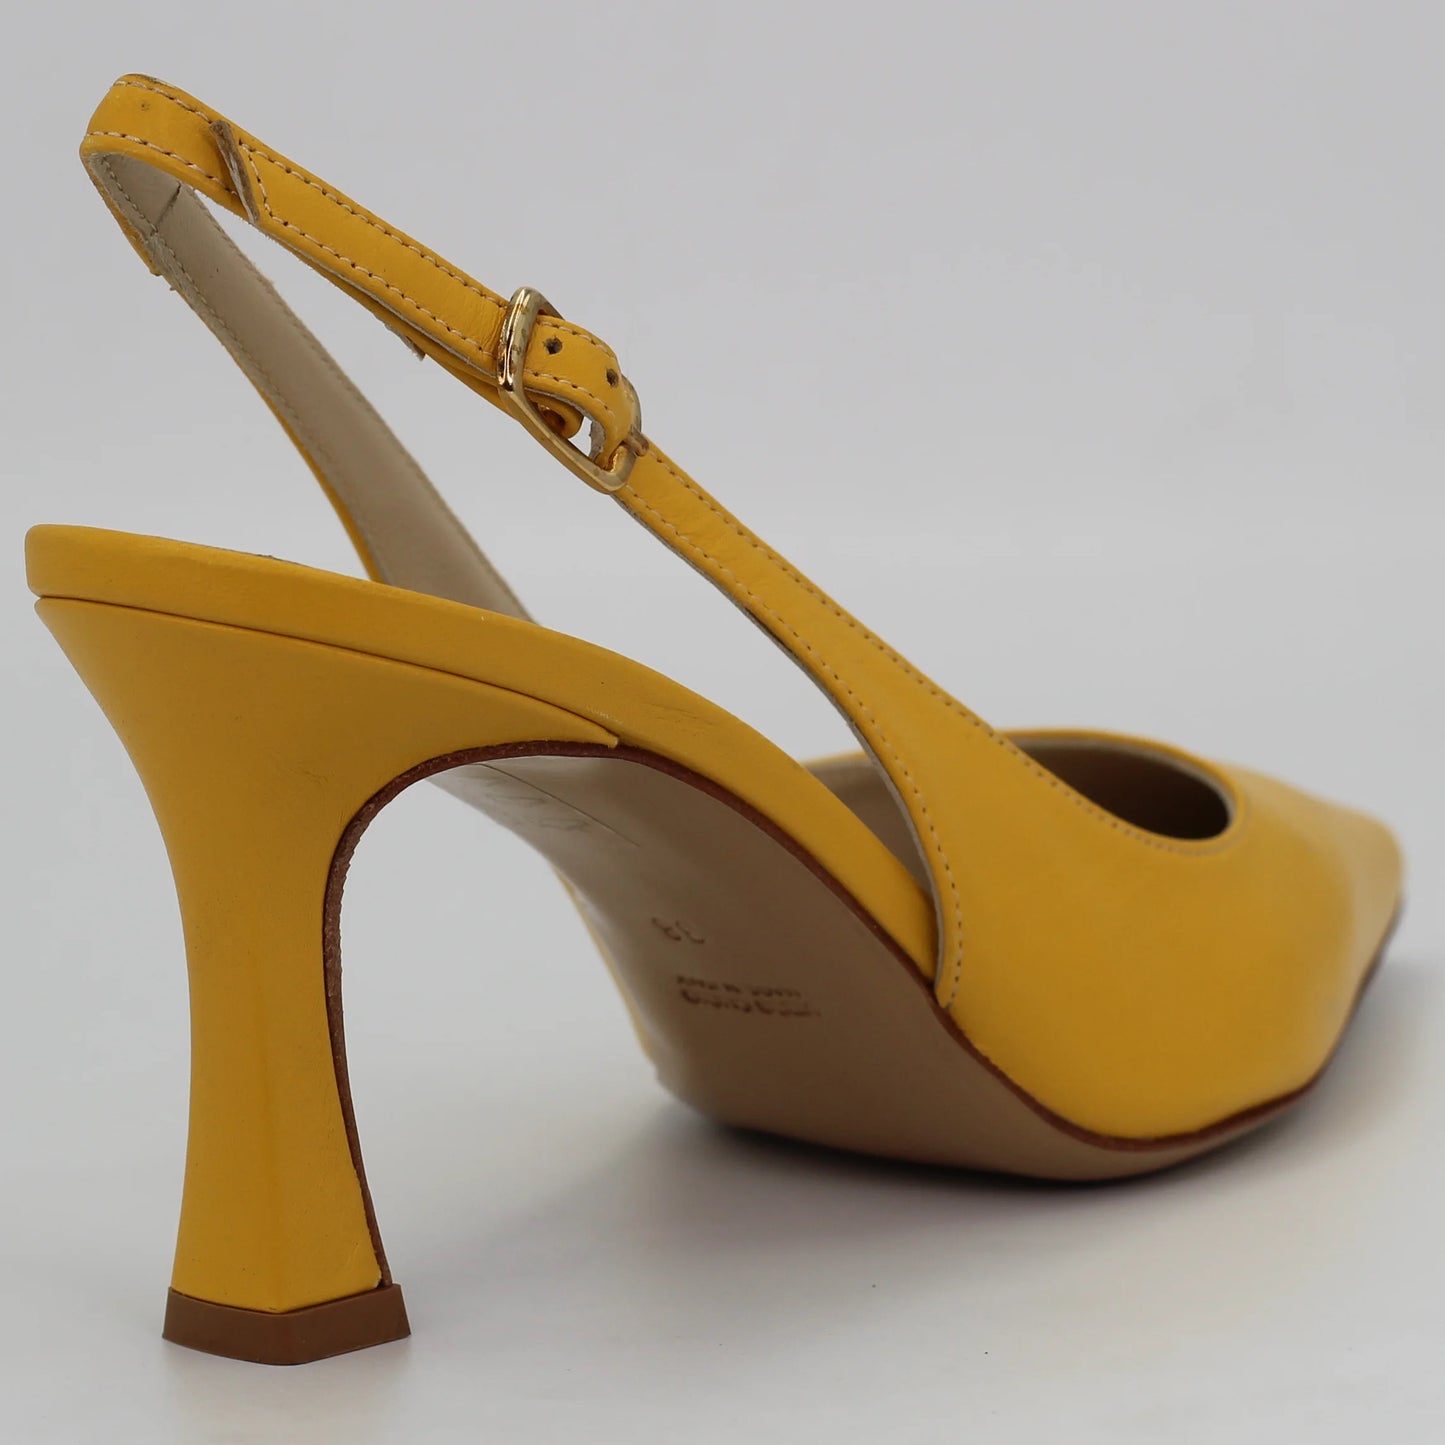 Shop Handmade Italian Leather sling back in yellow (MPE581) or browse our range of hand-made Italian shoes in leather or suede in-store at Aliverti Cape Town, or shop online. We deliver in South Africa & offer multiple payment plans as well as accept multiple safe & secure payment methods.